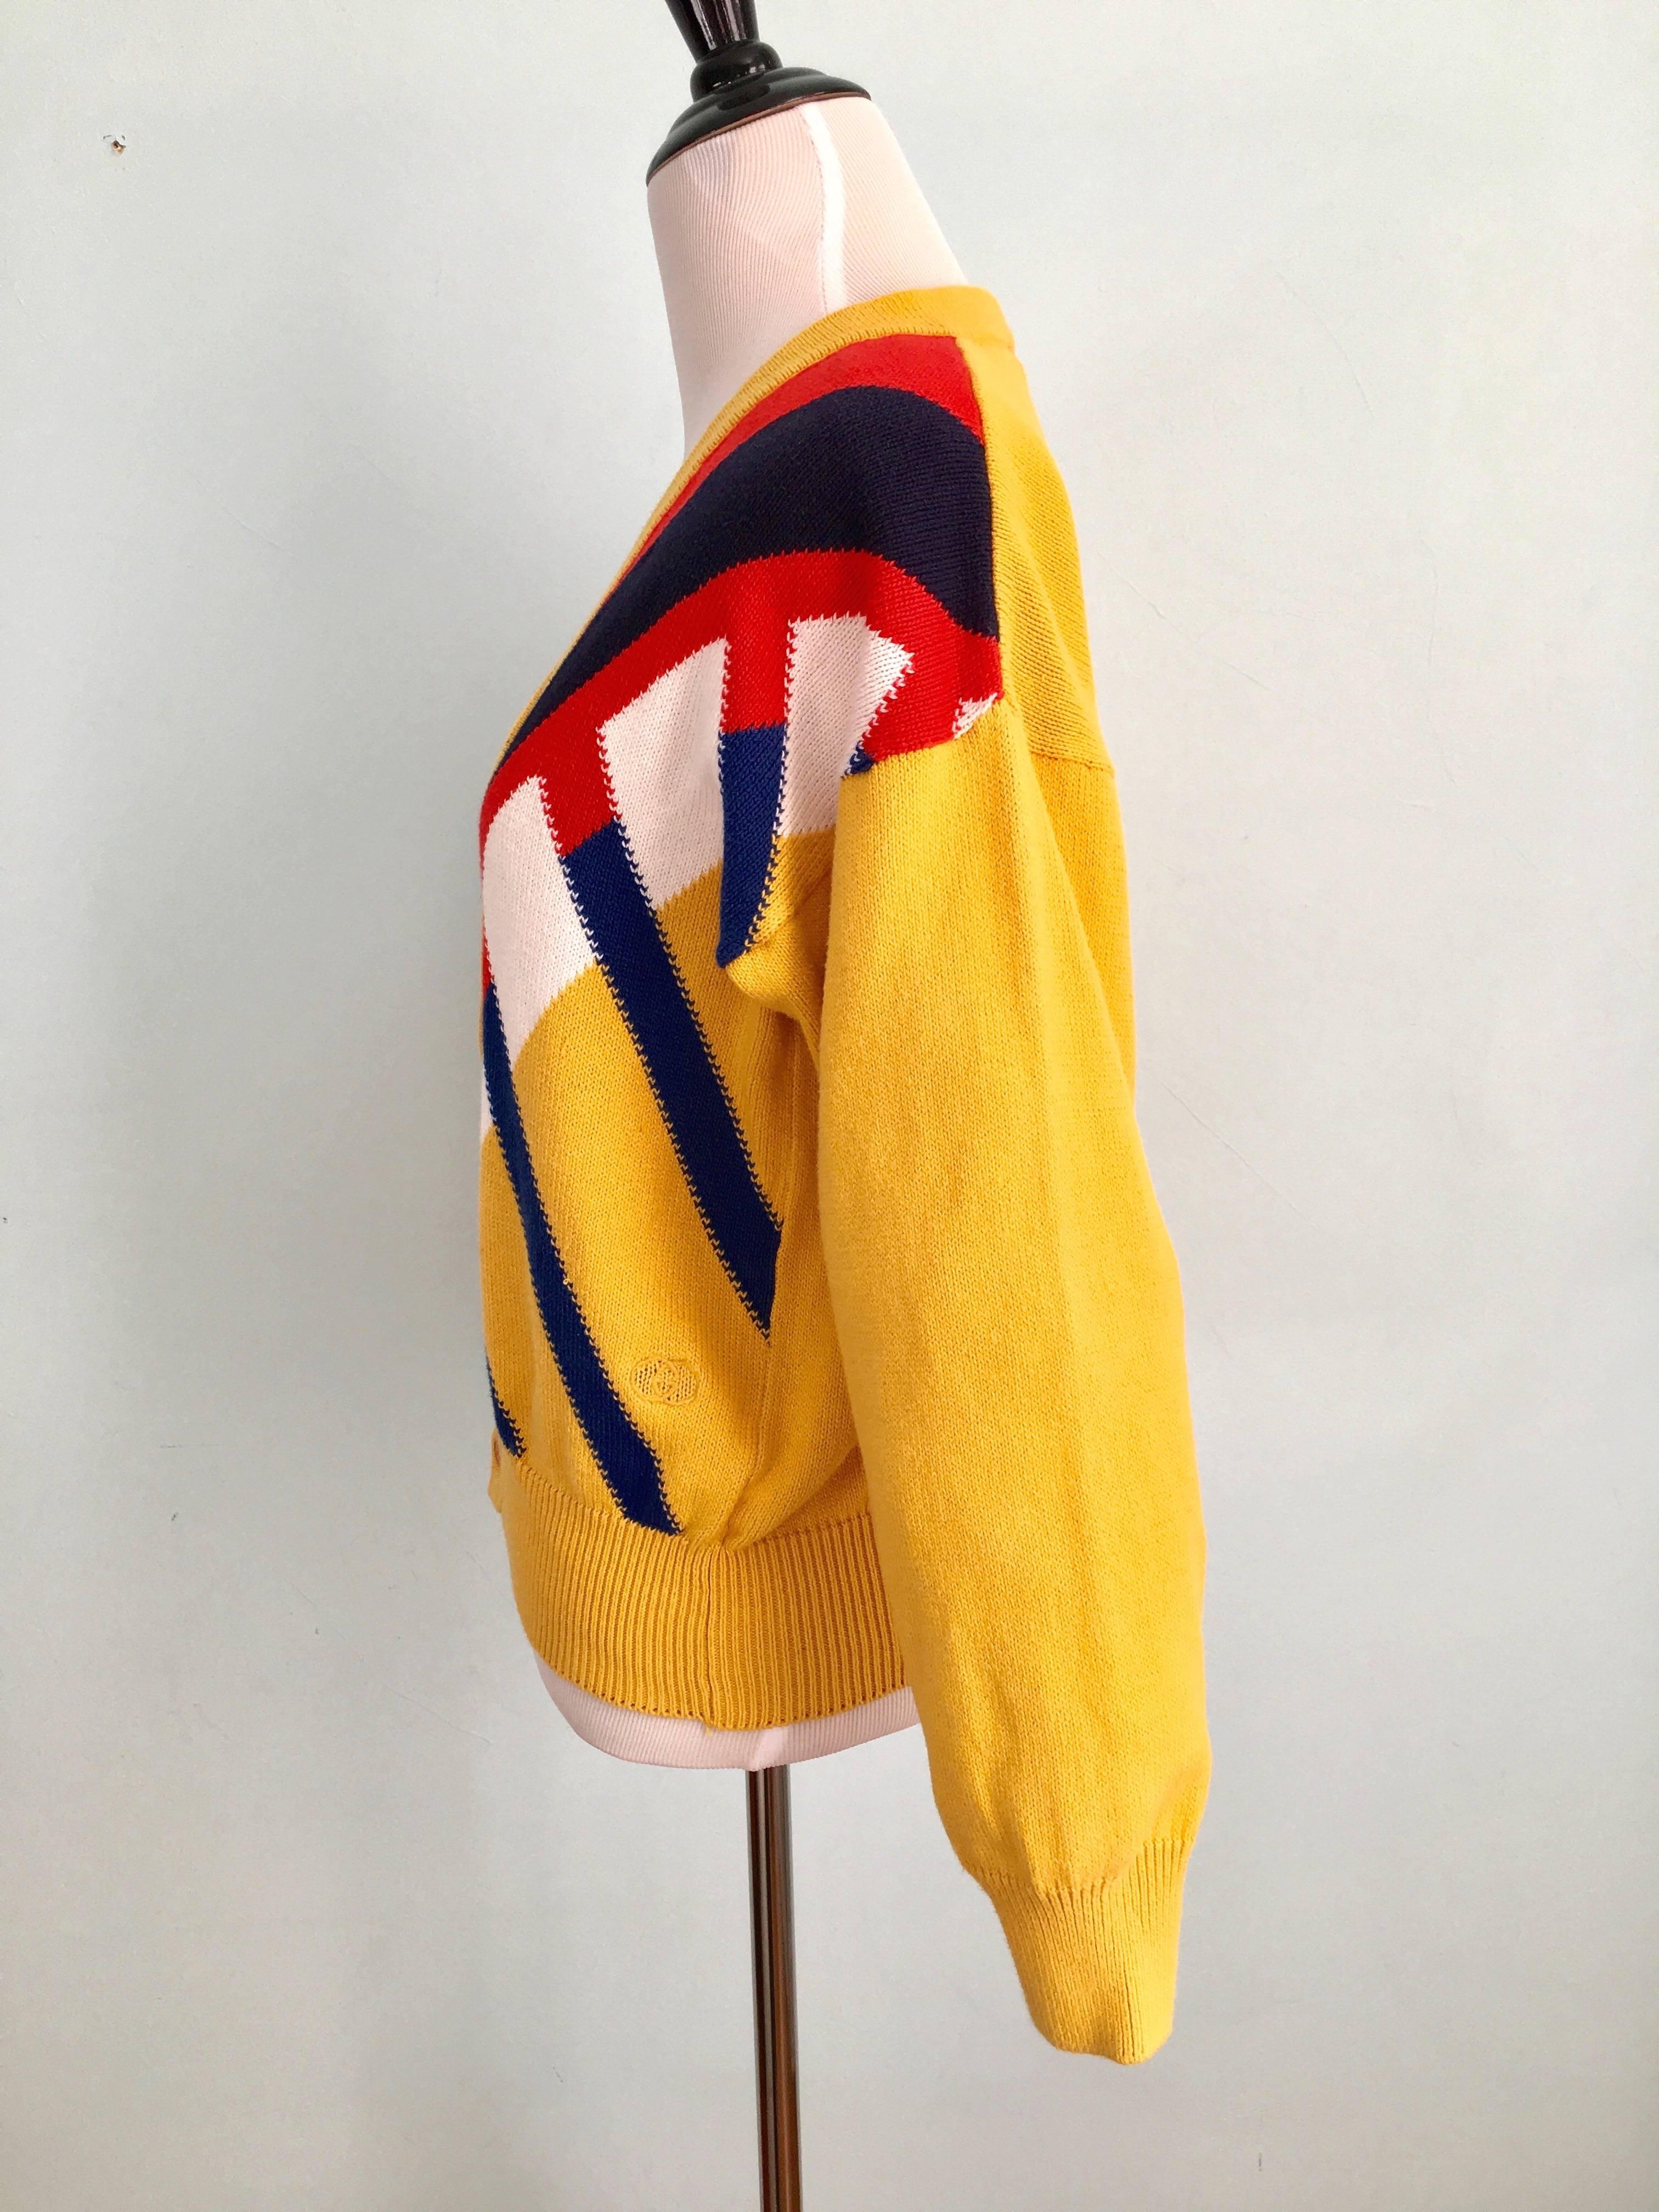 This is a 1980s cotton Gucci cardigan v-neck sweater with a graphic design on the front. On the front lower left side there is a yellow embroidered double "G" Gucci logo. The sweater is in excellent condition with the exception of a black